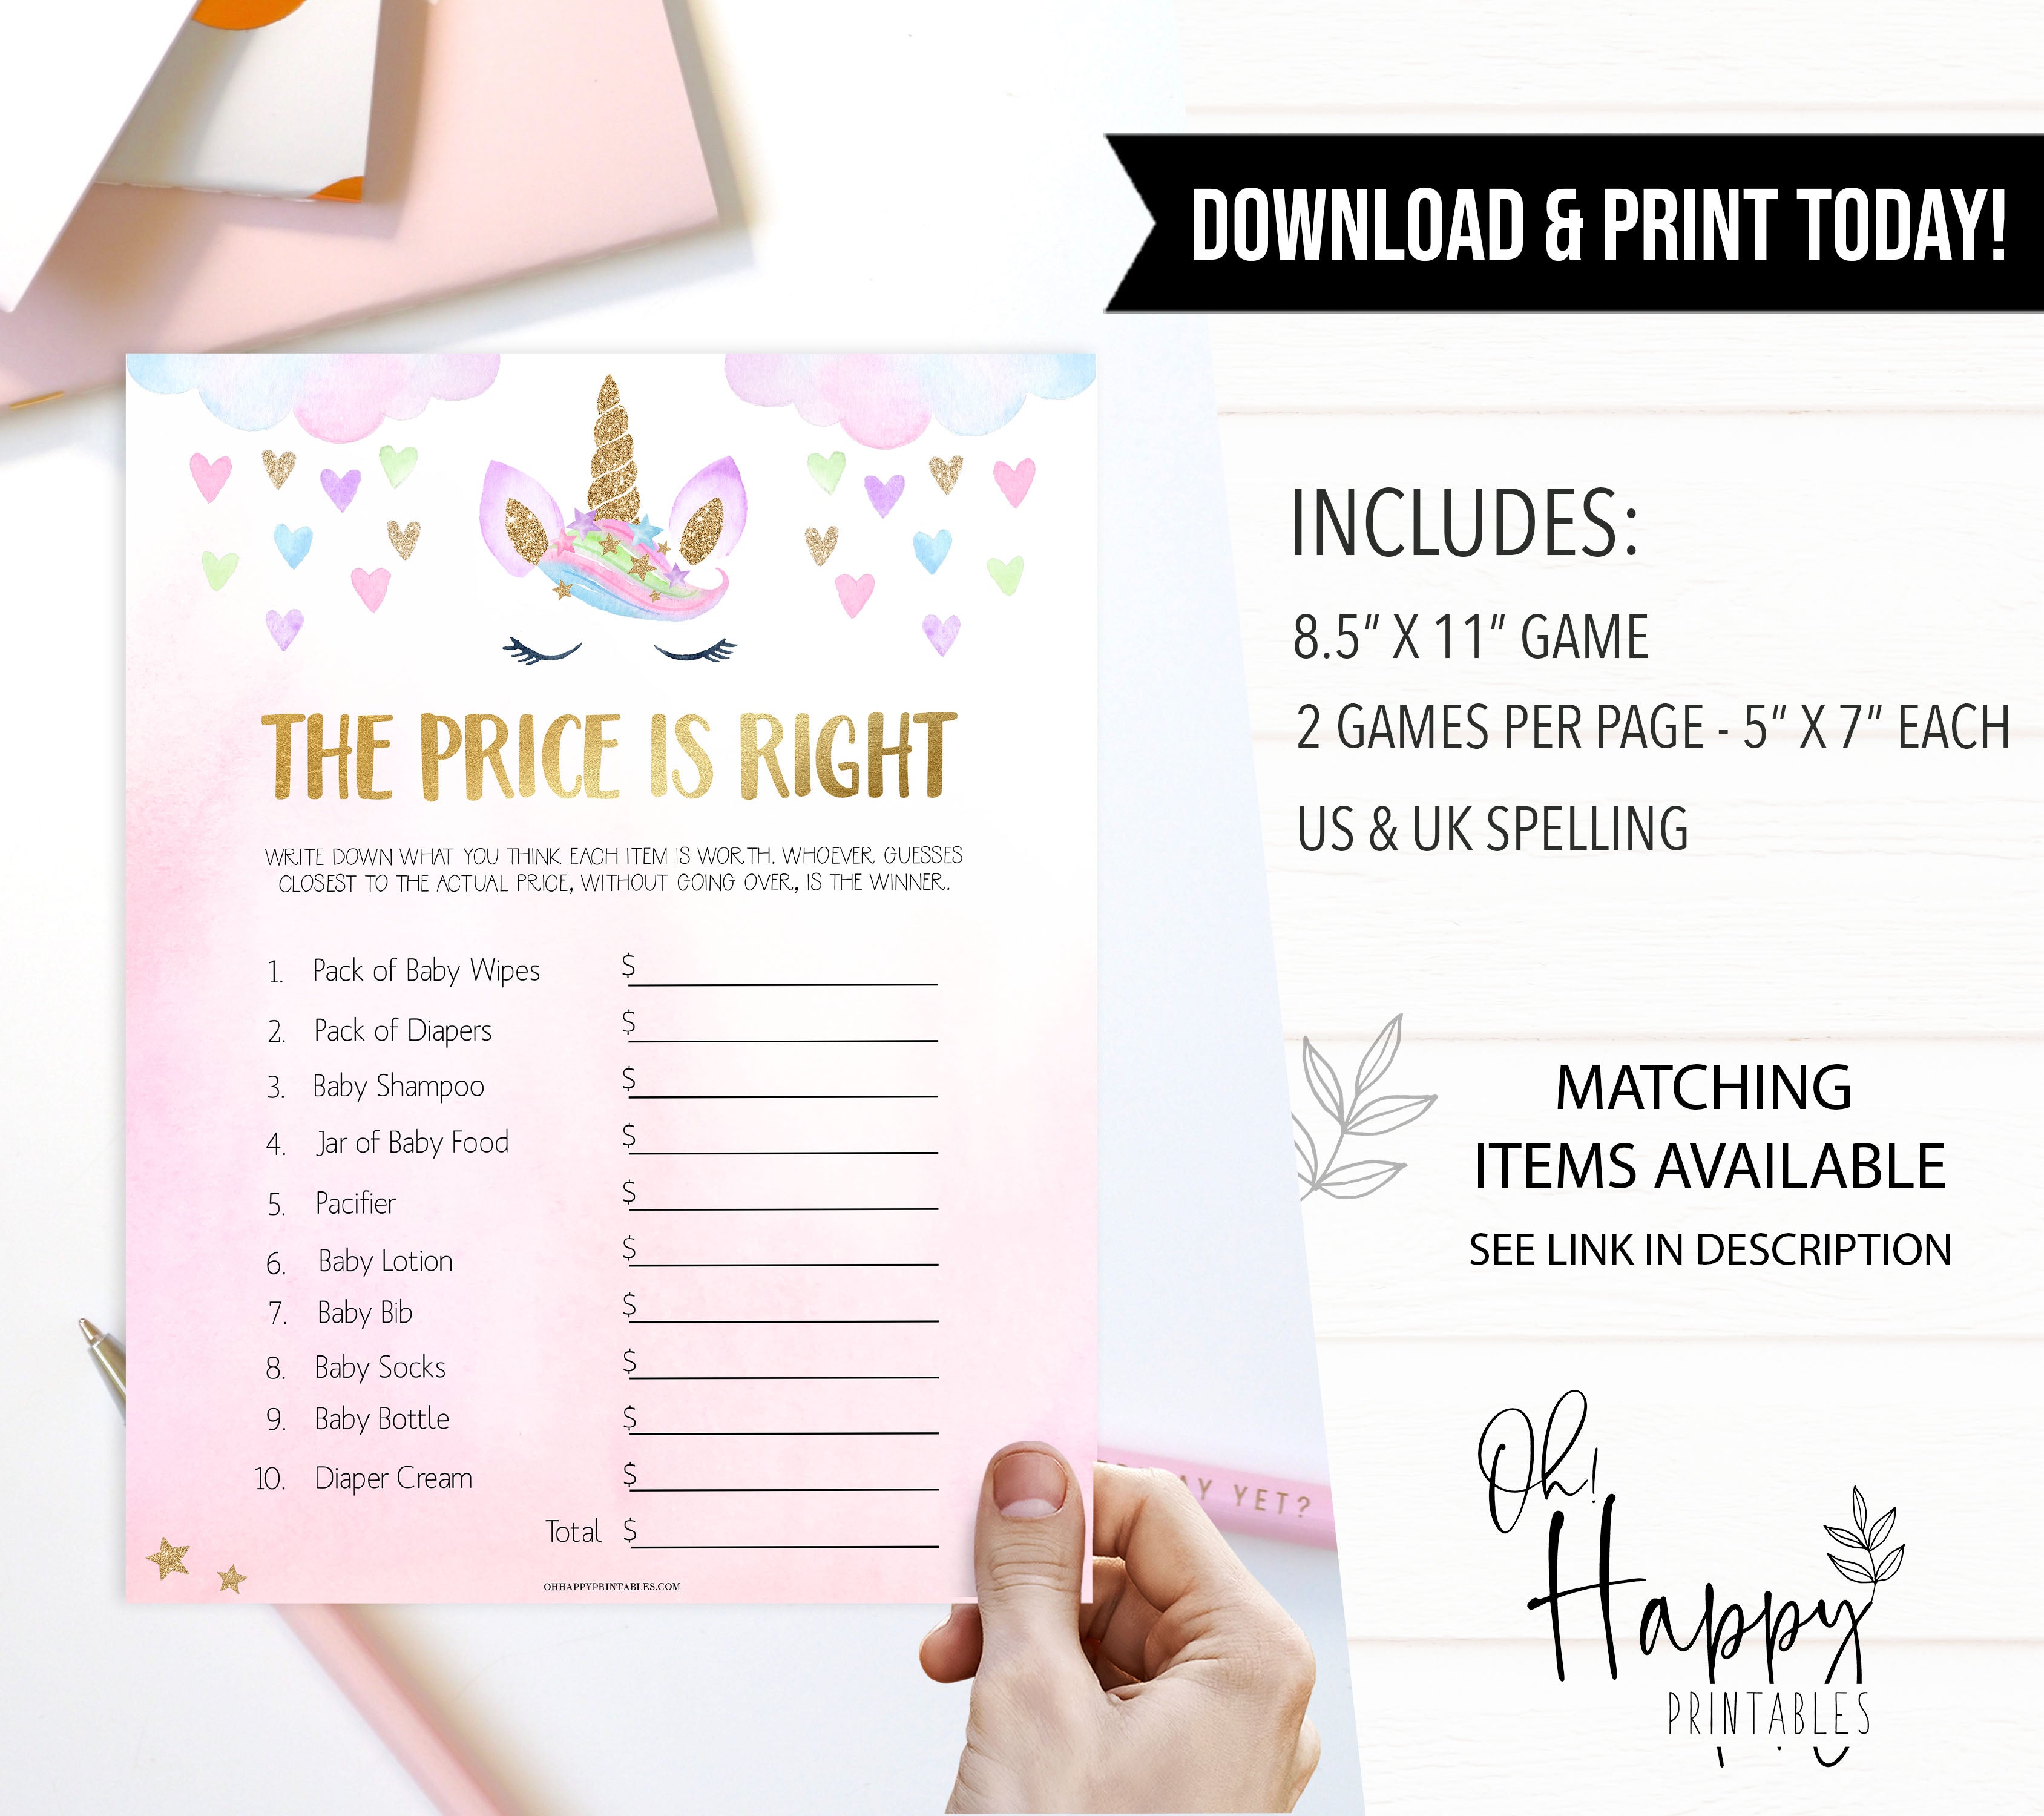 price is right baby game, Printable baby shower games, unicorn baby games, baby shower games, fun baby shower ideas, top baby shower ideas, unicorn baby shower, baby shower games, fun unicorn baby shower ideas